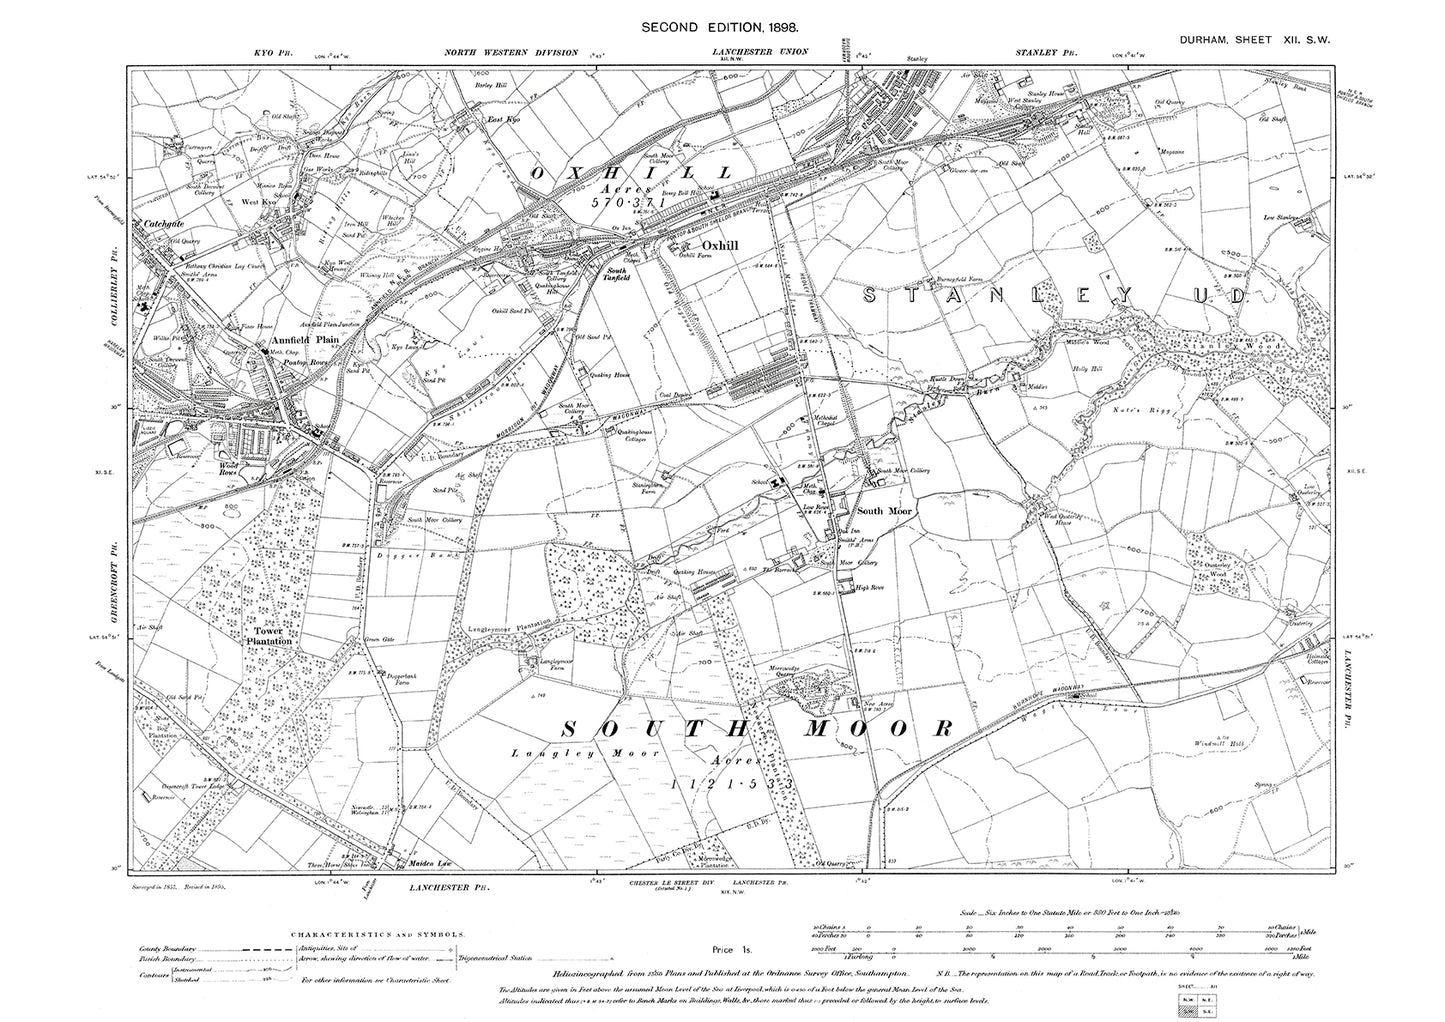 Old OS map dated 1898, showing Oxhill, Annfield Plain and South Moor in Durham - 12SW